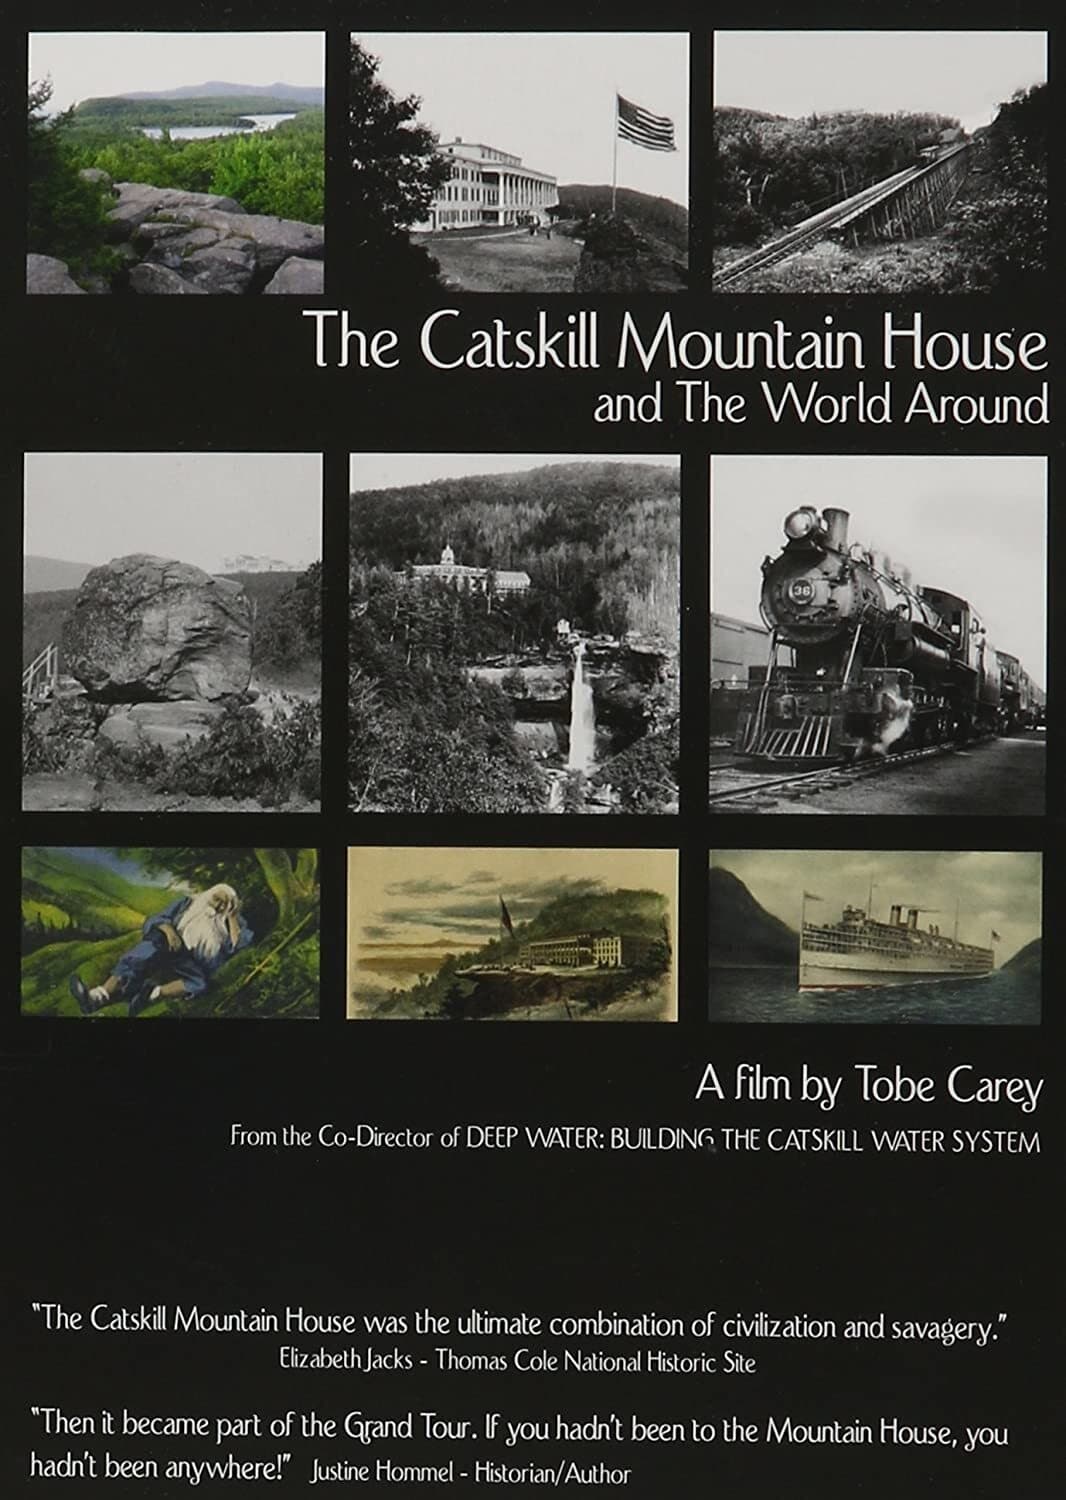 The Catskill Mountain House and the World Around